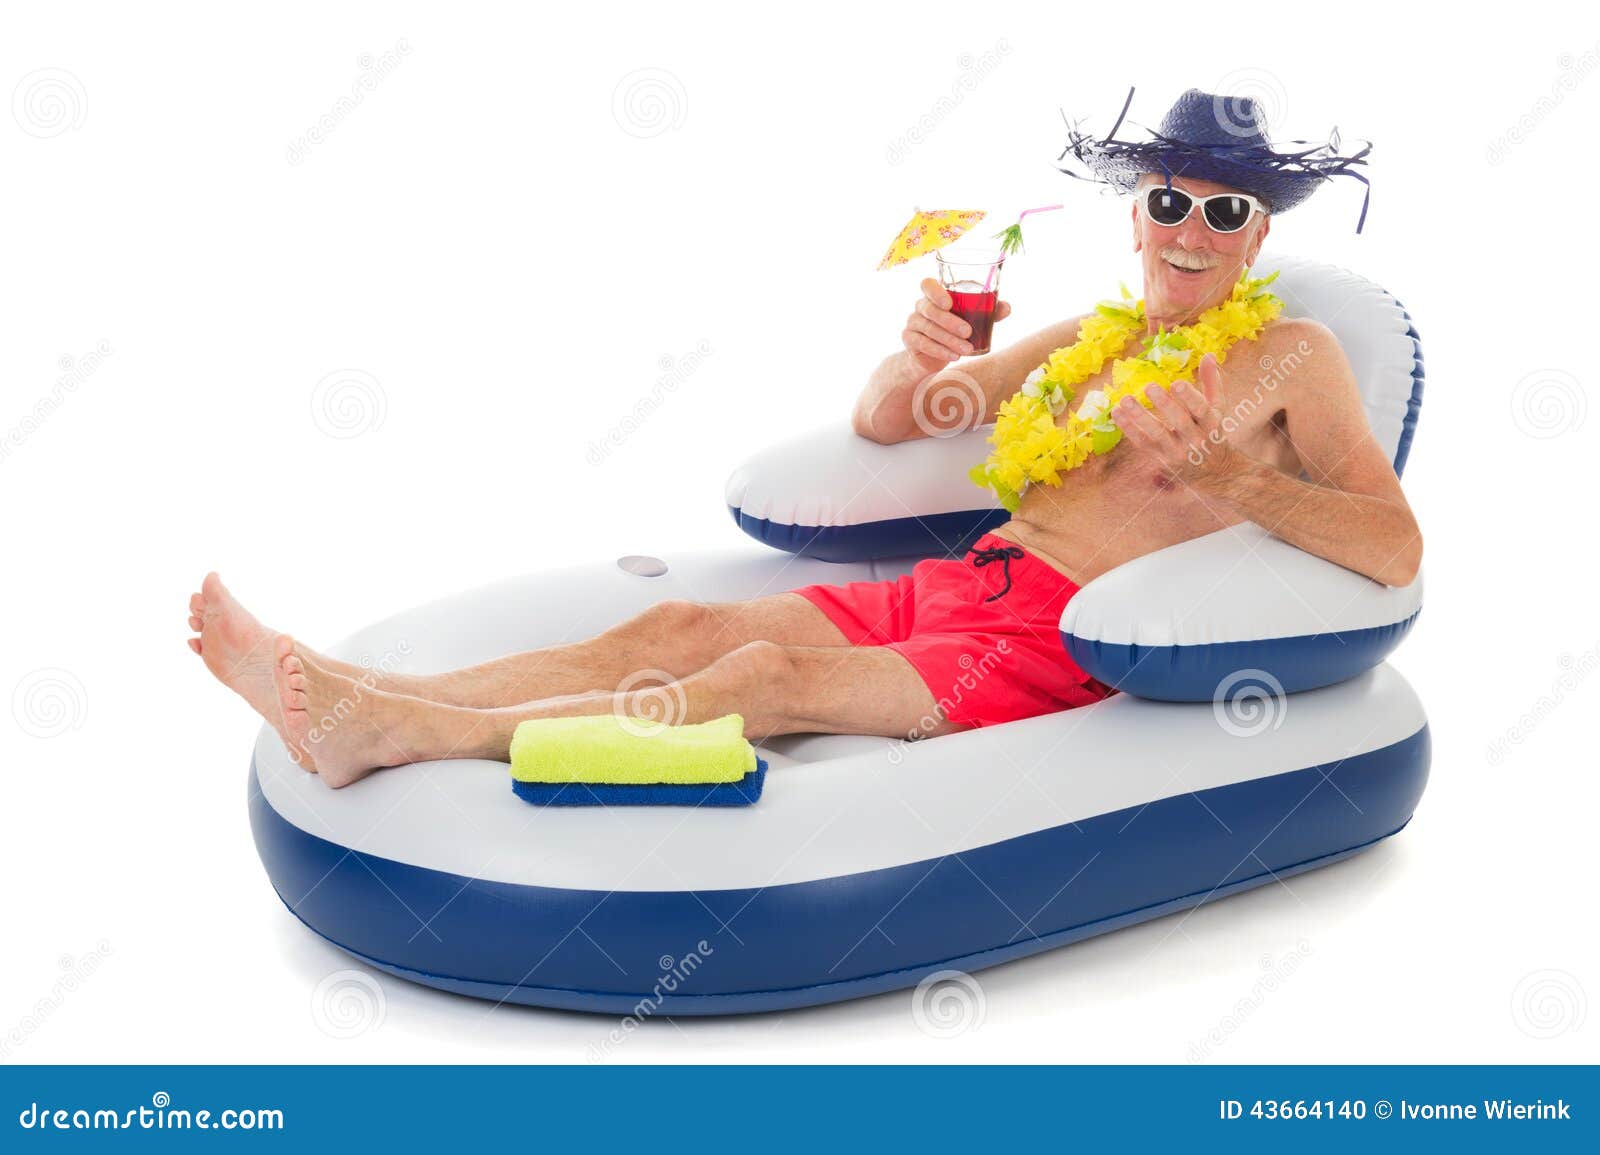 Floating In Chair In Swimming Pool Stock Photo Image Of